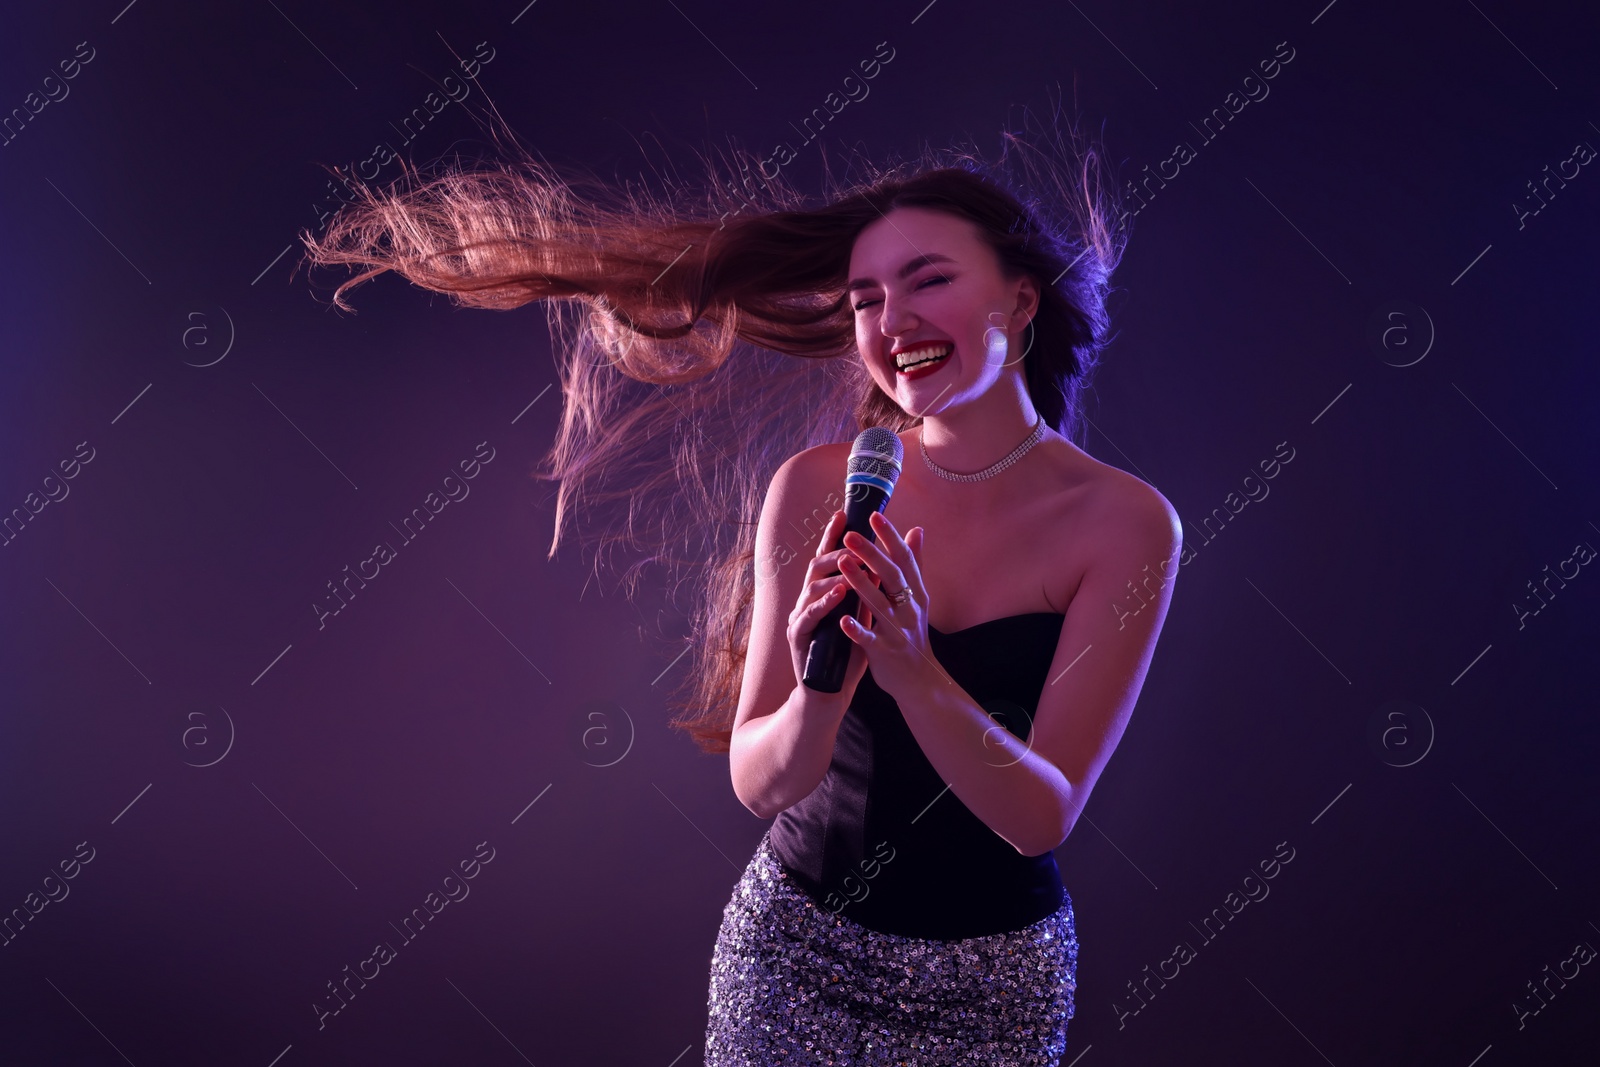 Photo of Emotional woman with microphone singing in neon lights on dark background